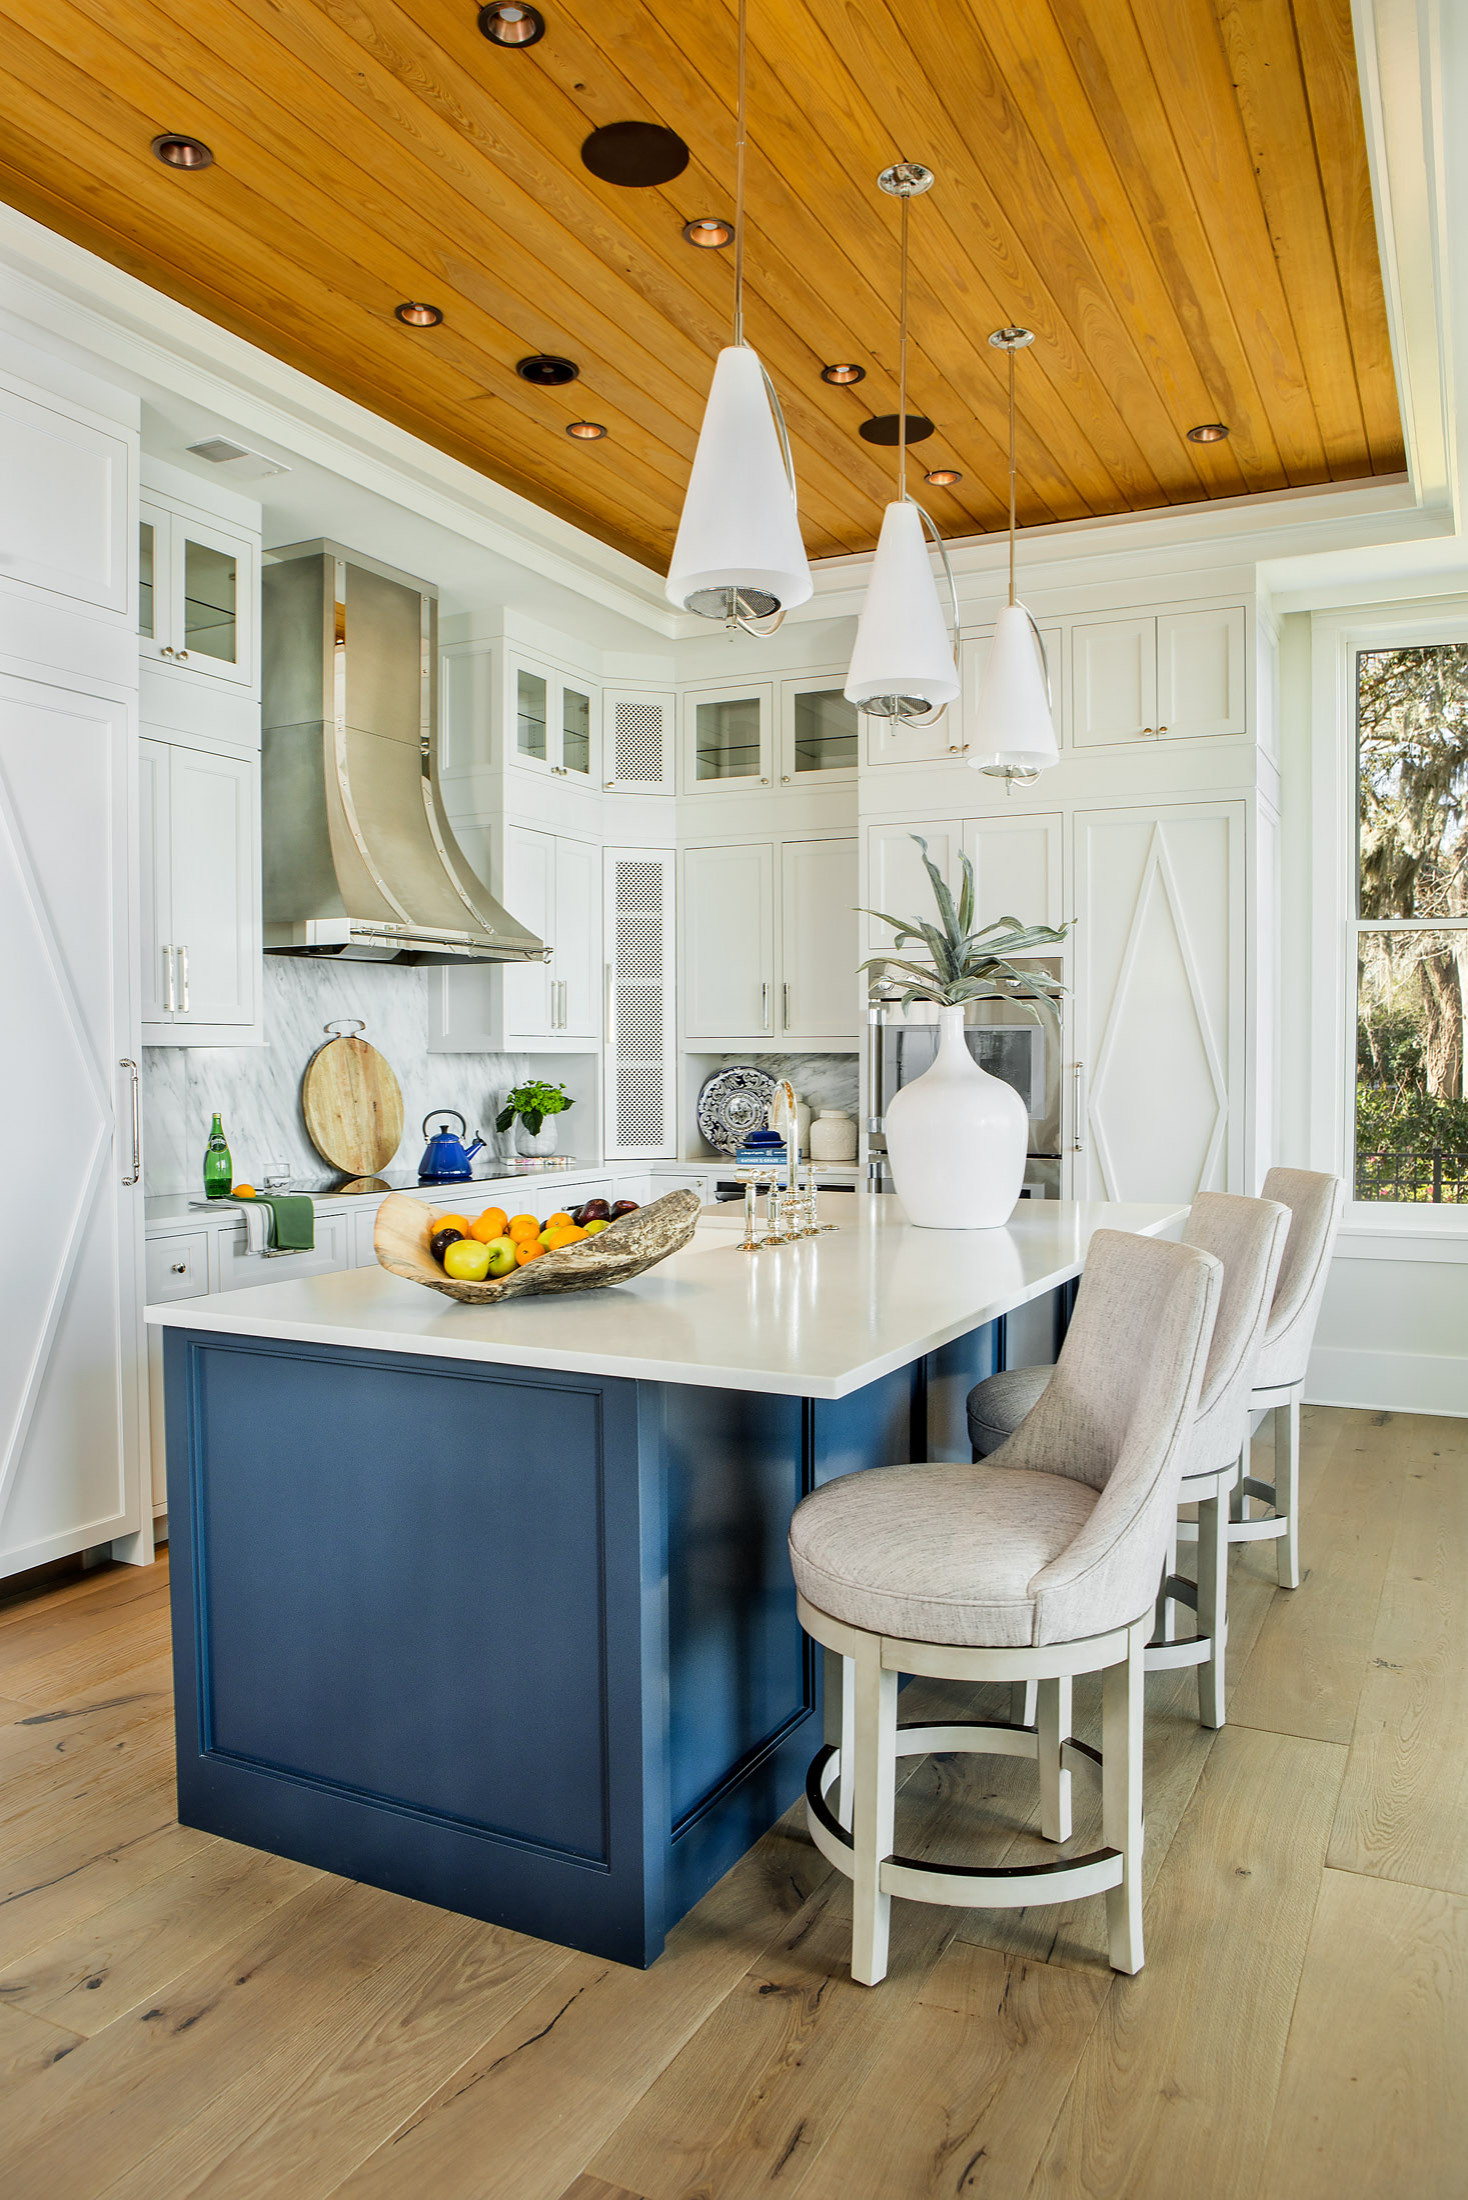 75 Wood Ceiling Kitchen With White